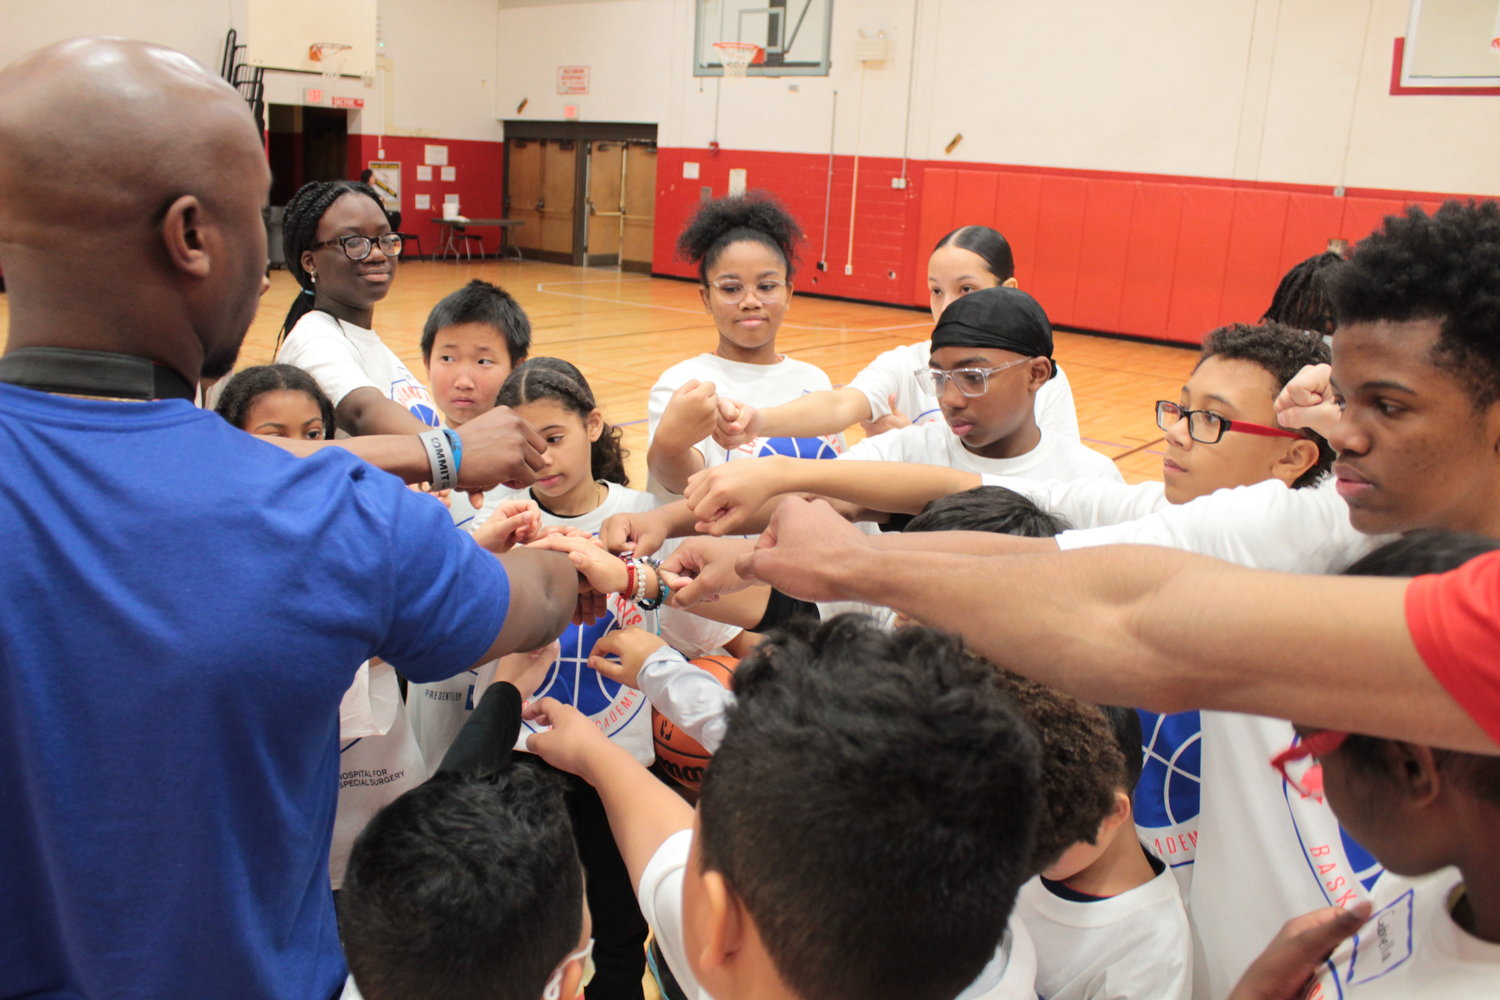 The Long Island Nets and NBA athletes team up to offer Freeport students free basketball lessons and STEM education day games.